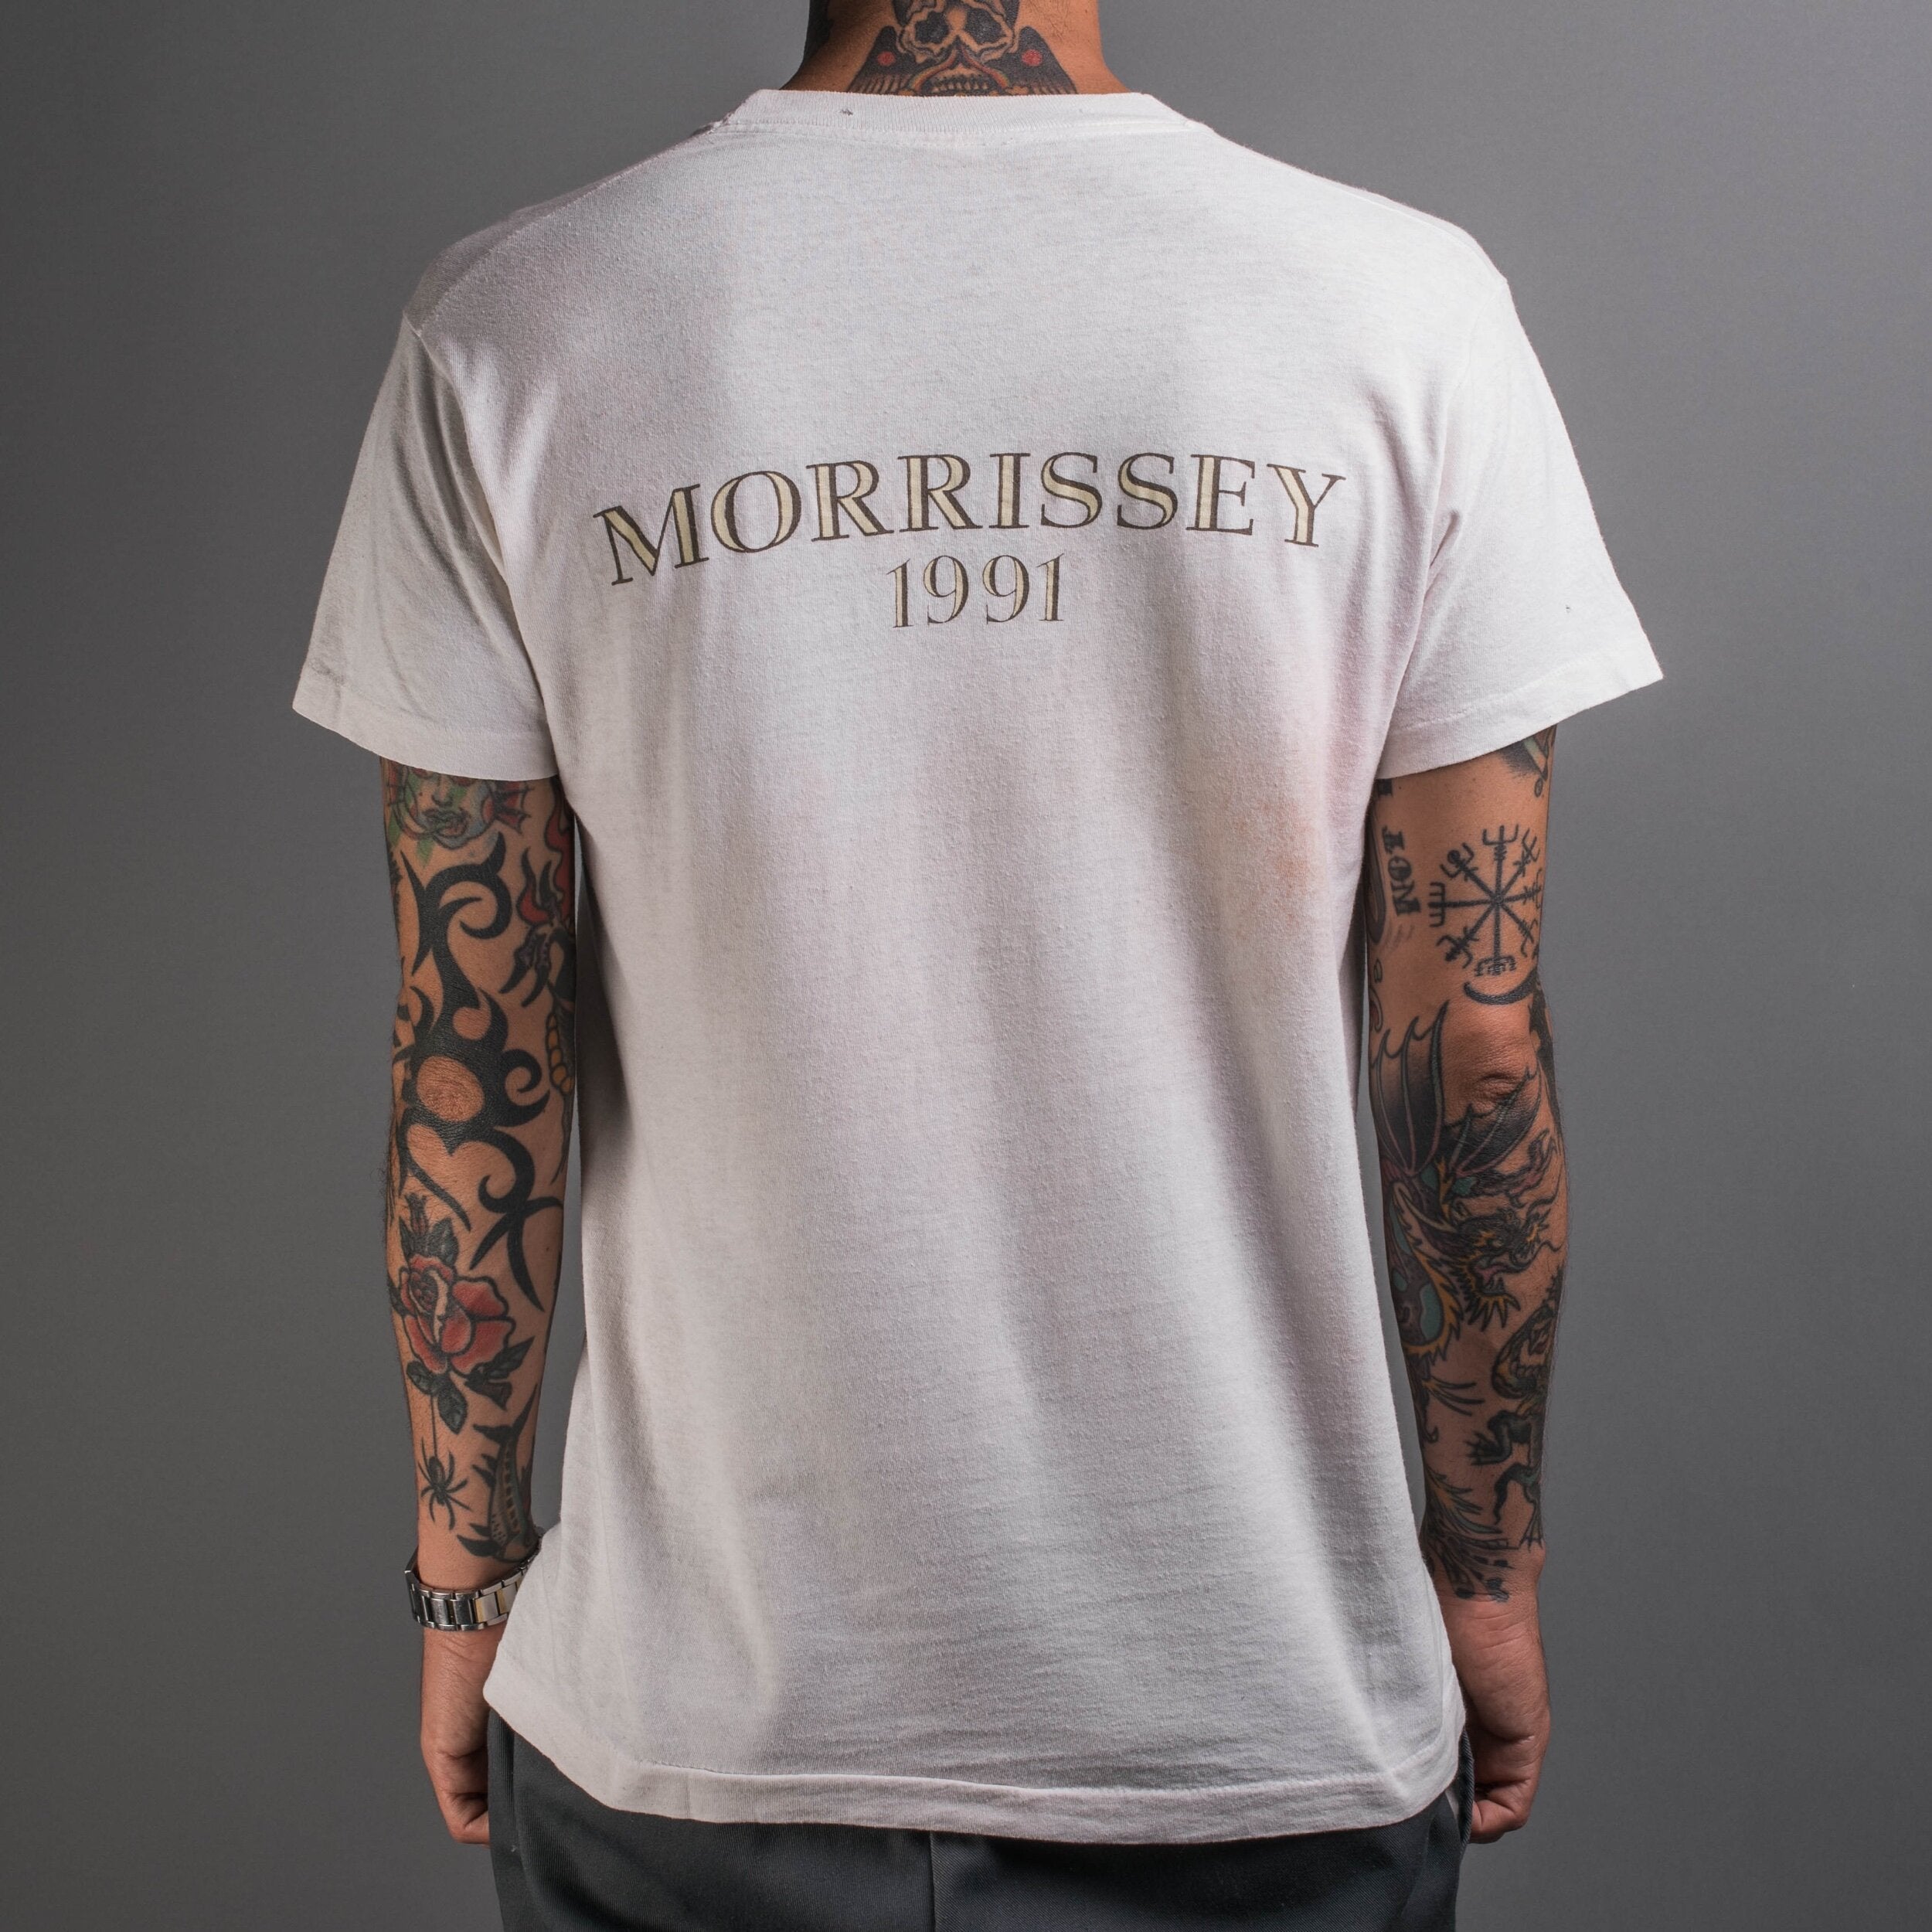 Vintage 1991 Morrissey Edith Sitwell T-Shirt